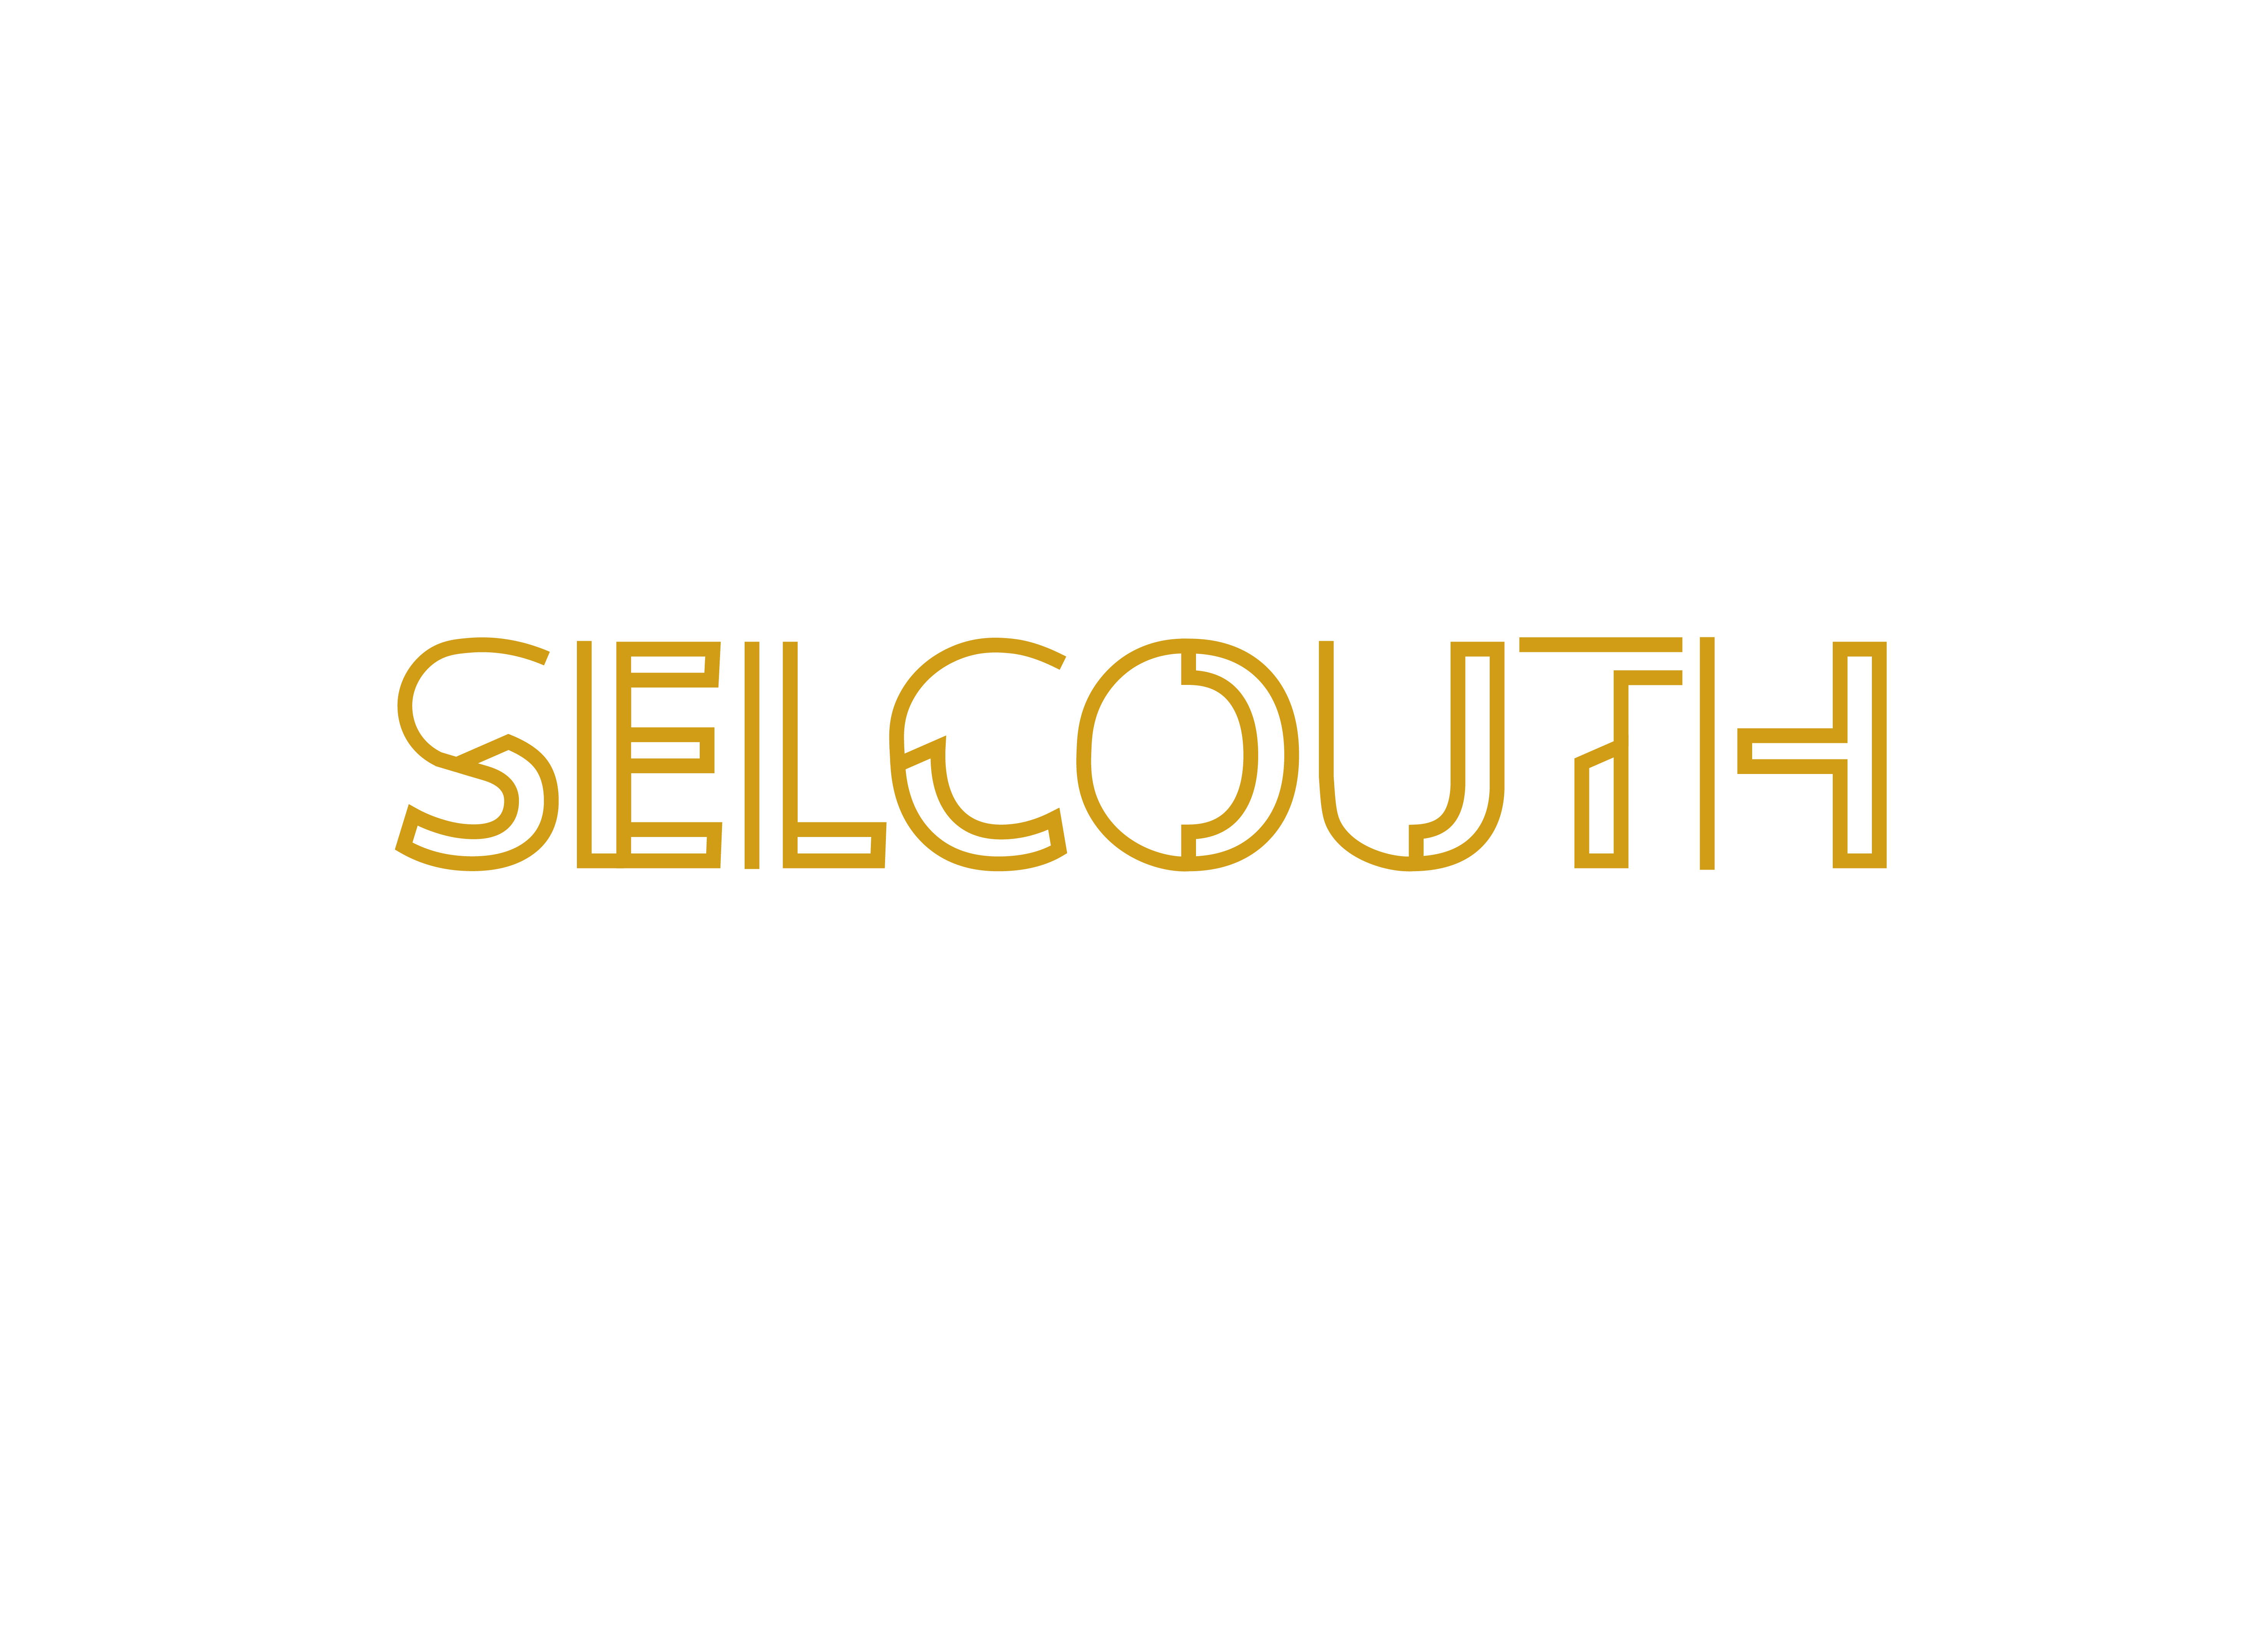 Selcouth type 1 -01